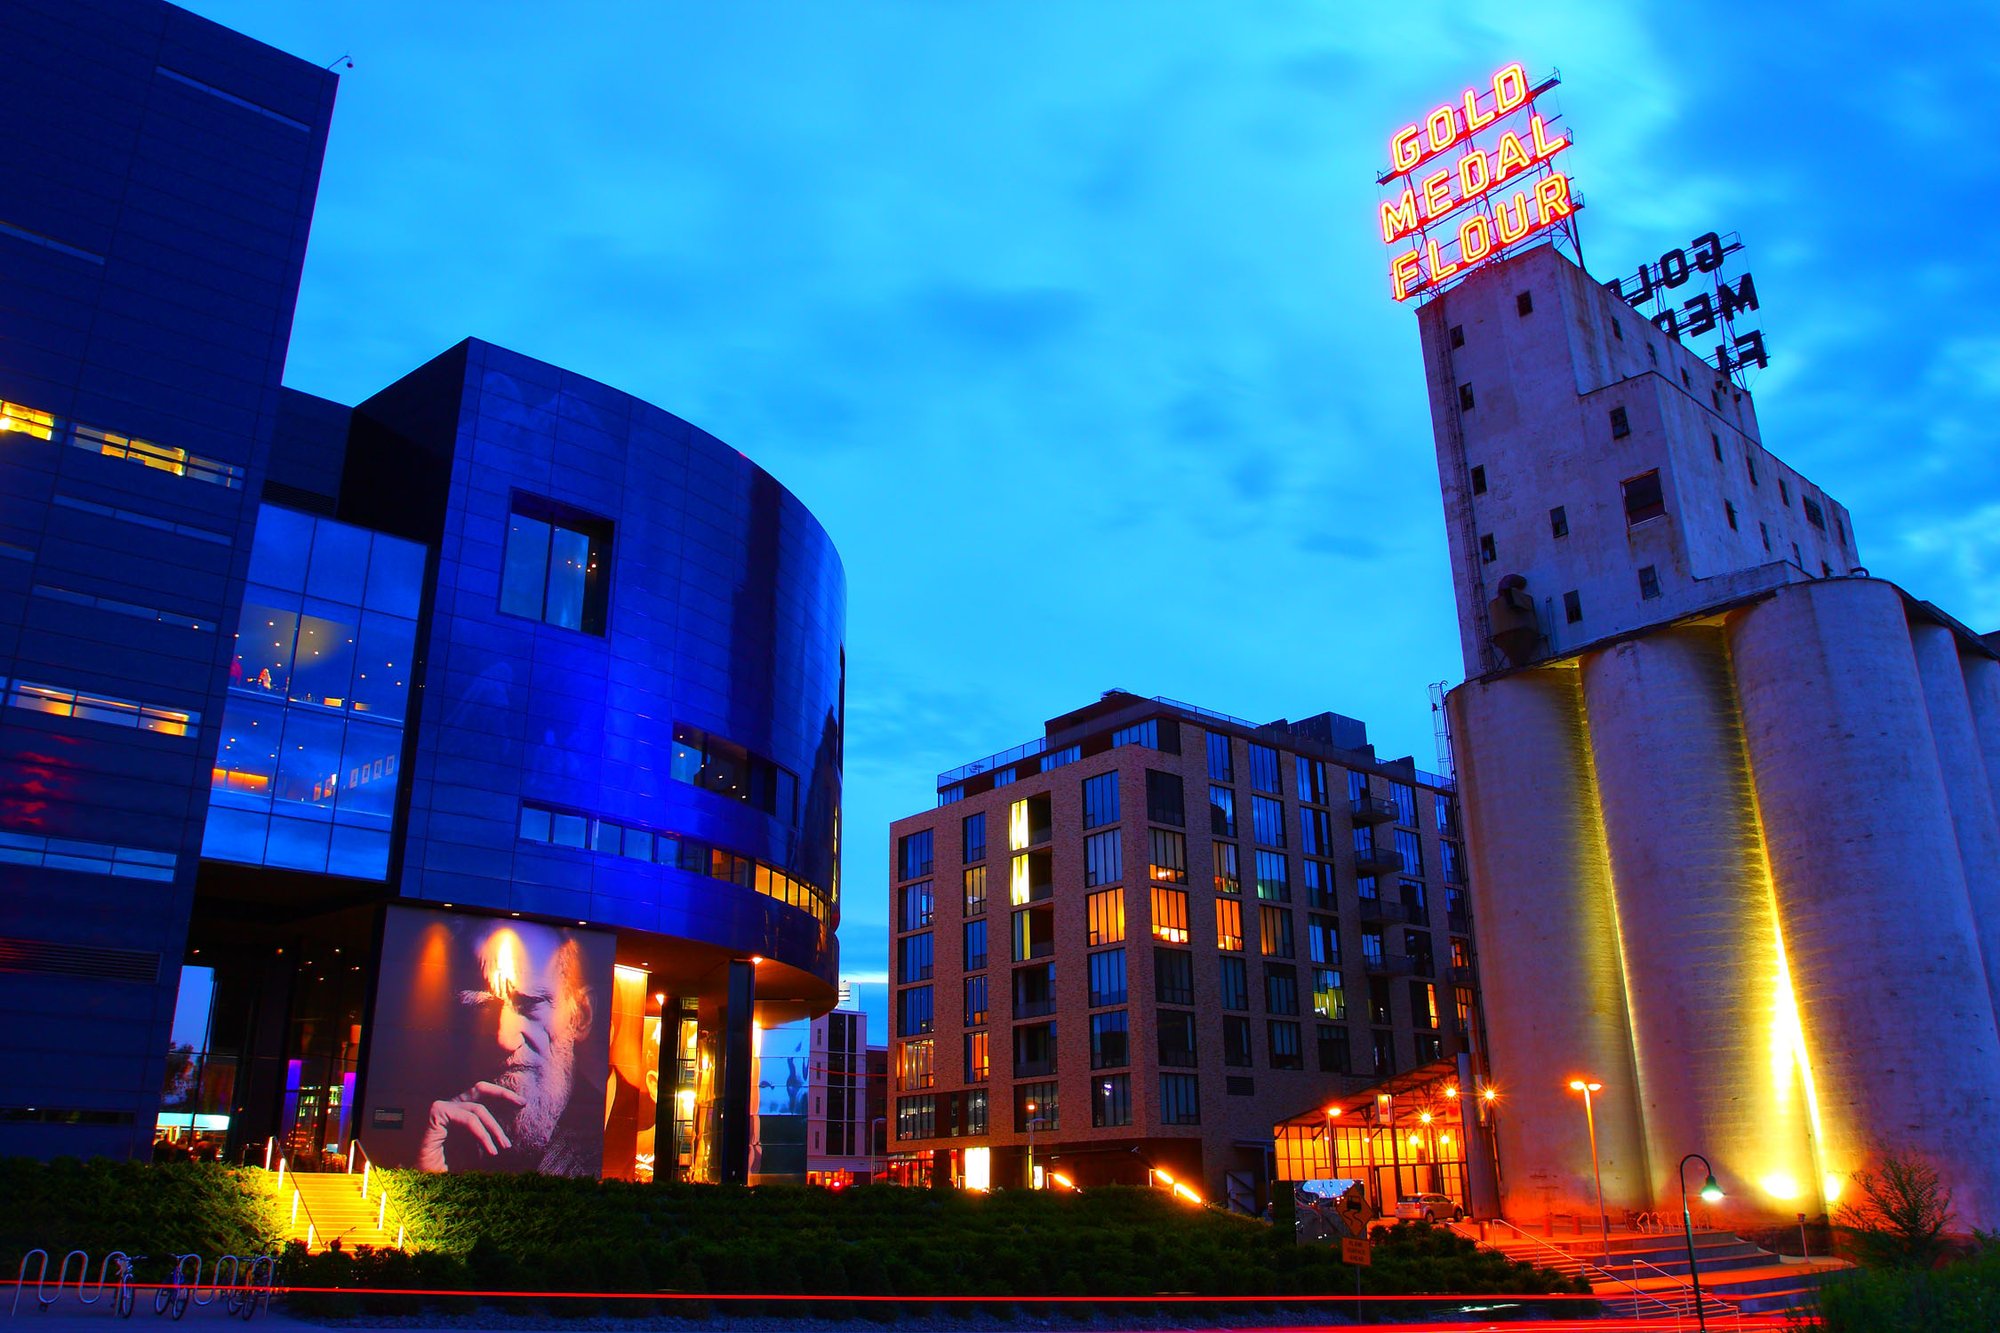 Banner image: Guthrie Theater in Minneapolis